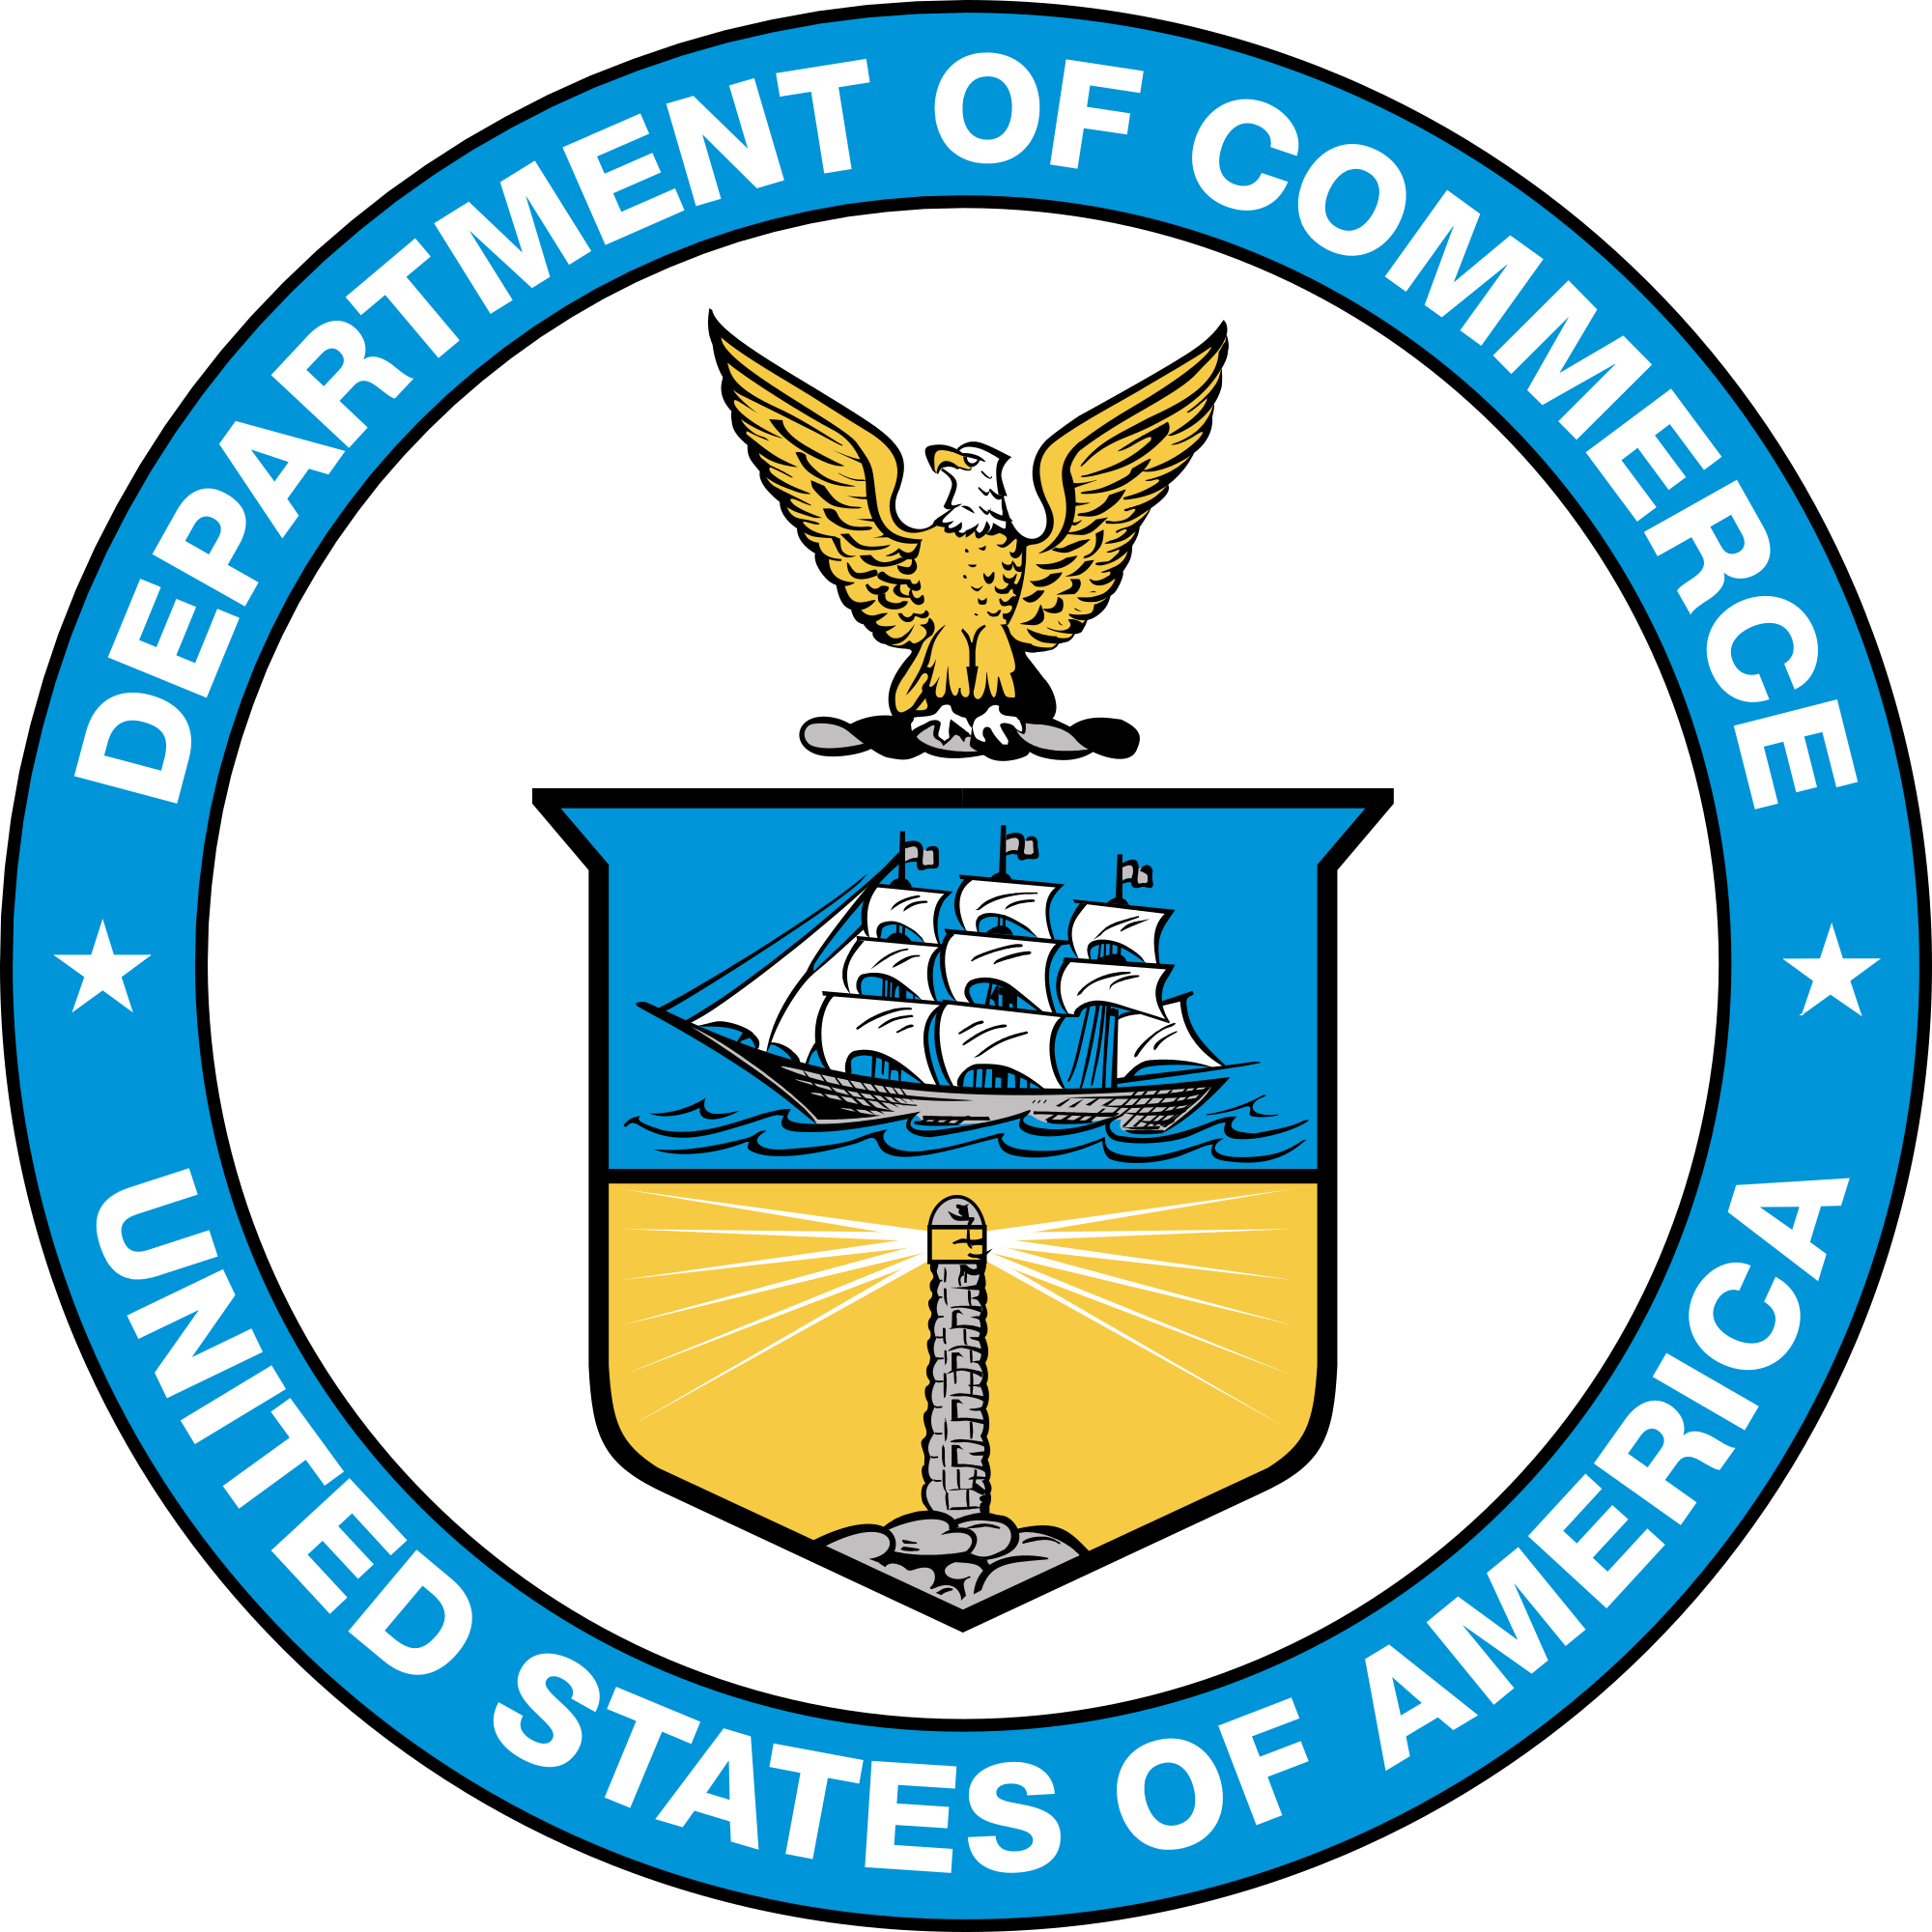 2000px-Seal_of_the_United_States_Department_of_Commerce.svg.png